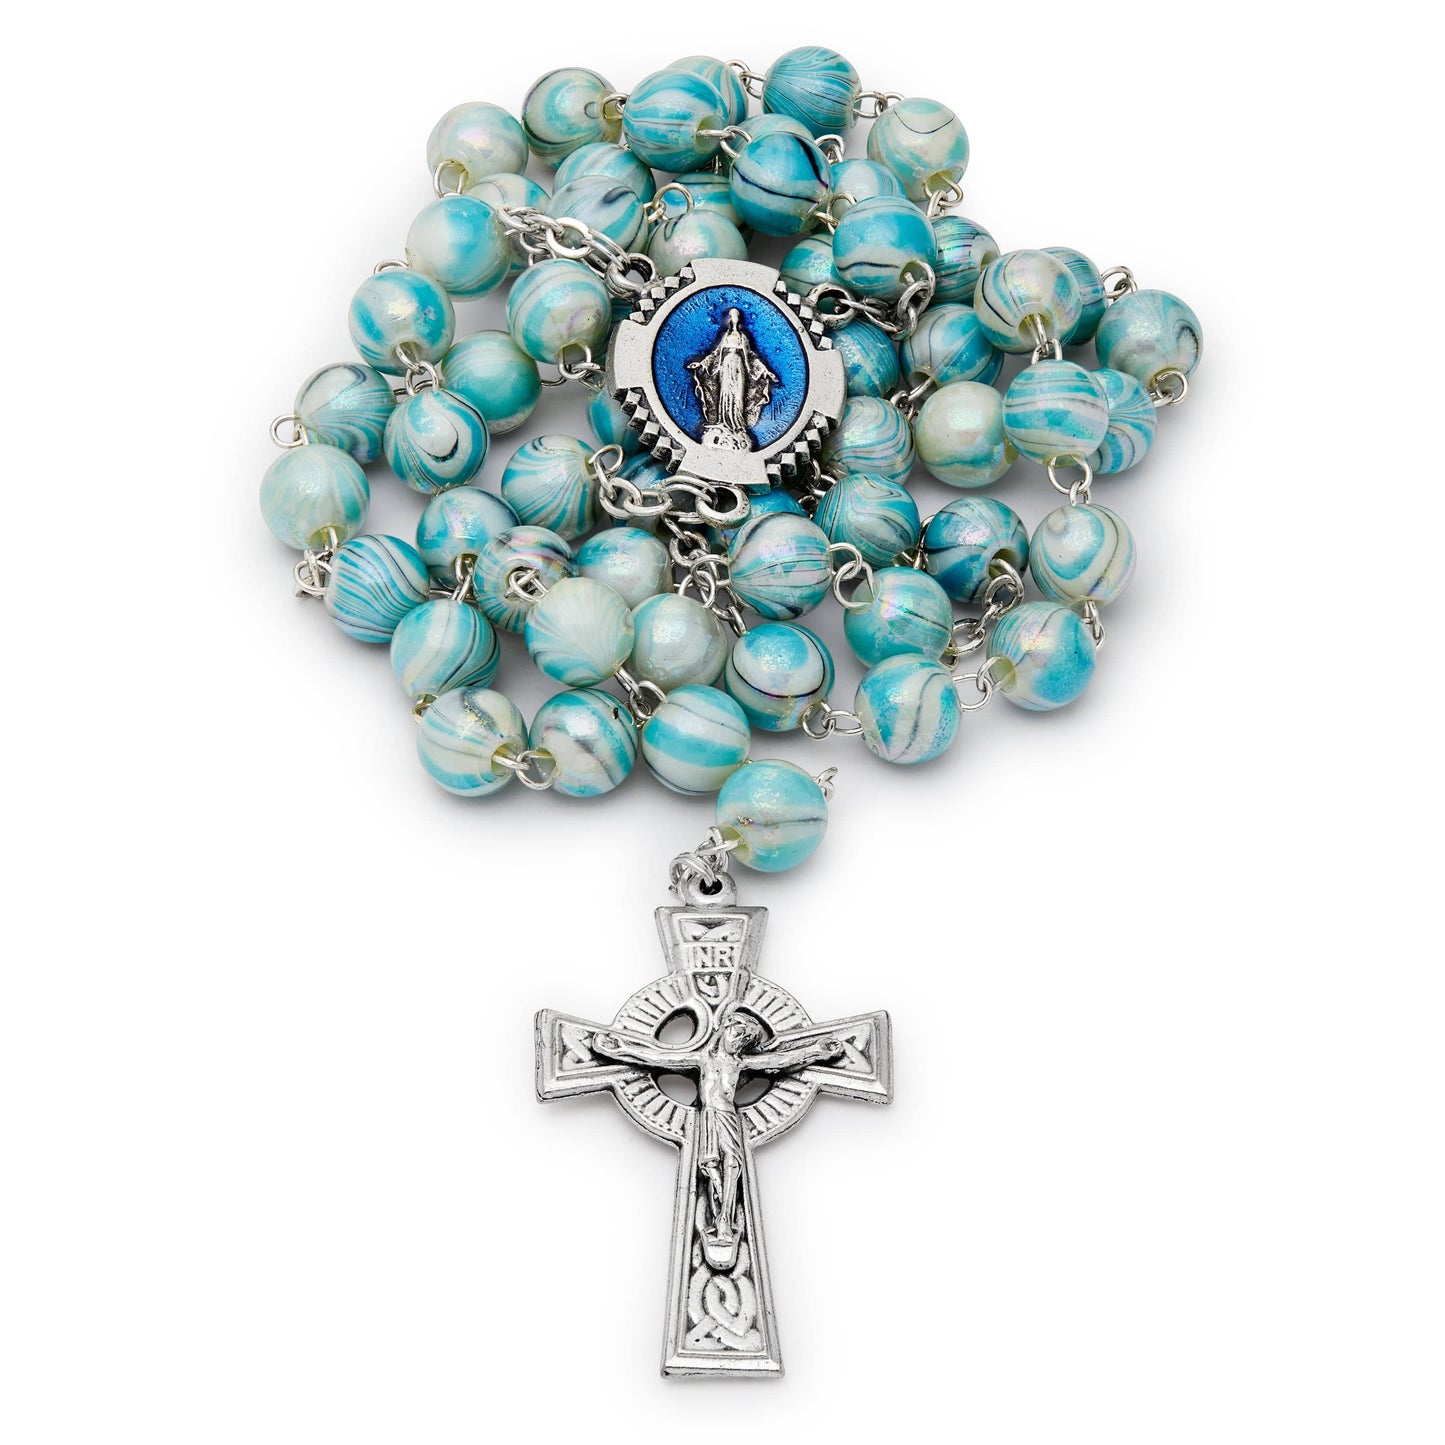 MONDO CATTOLICO Prayer Beads 53 cm (20.86 in) / 8 mm (0.31 in) Our Lady of Miraculous Medal Five Decades Rosary Beads